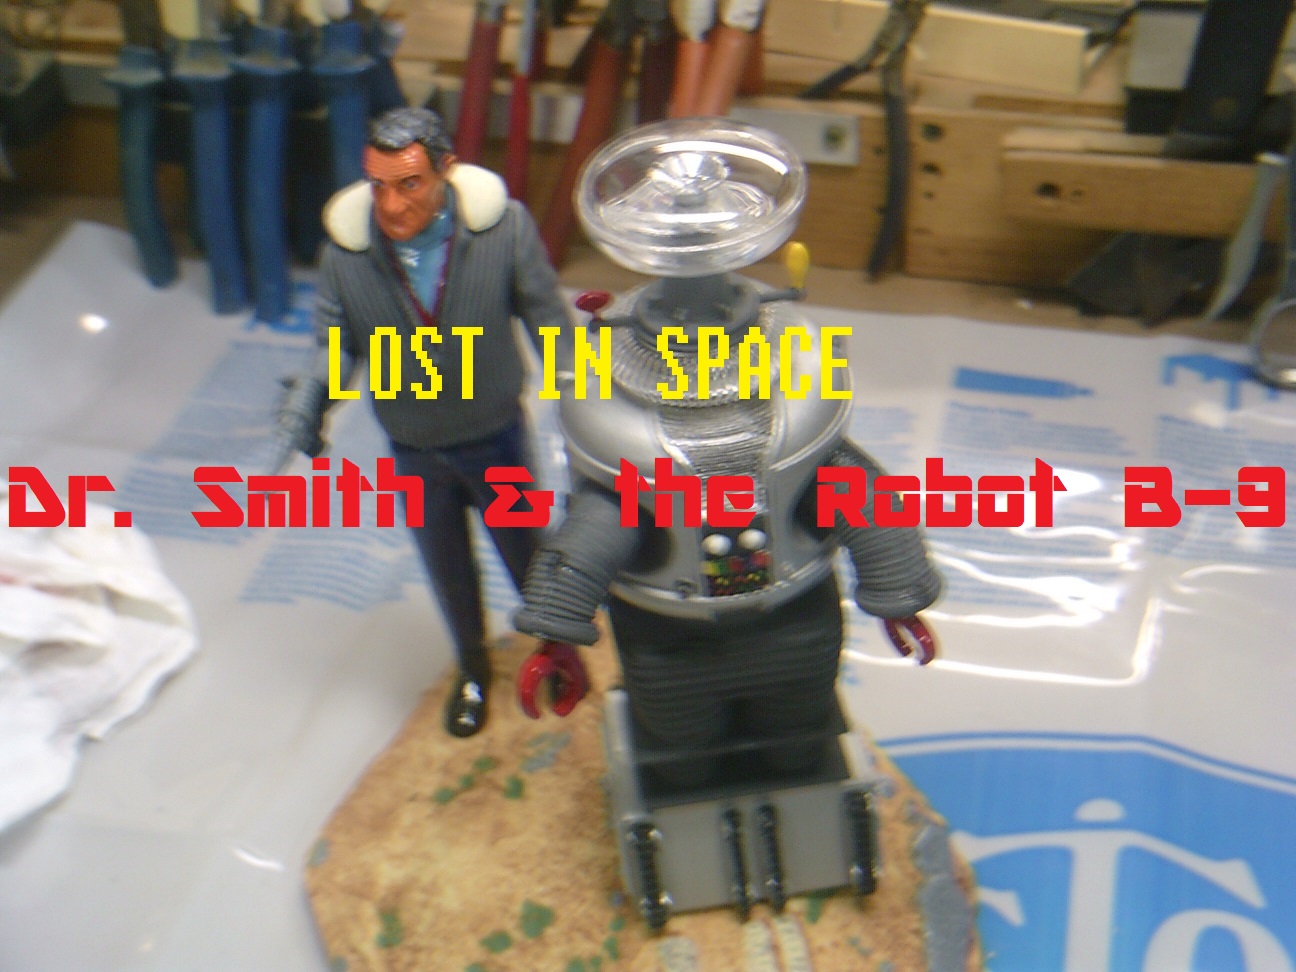 Lost In Space Robot B-9 & Dr. Smith ~